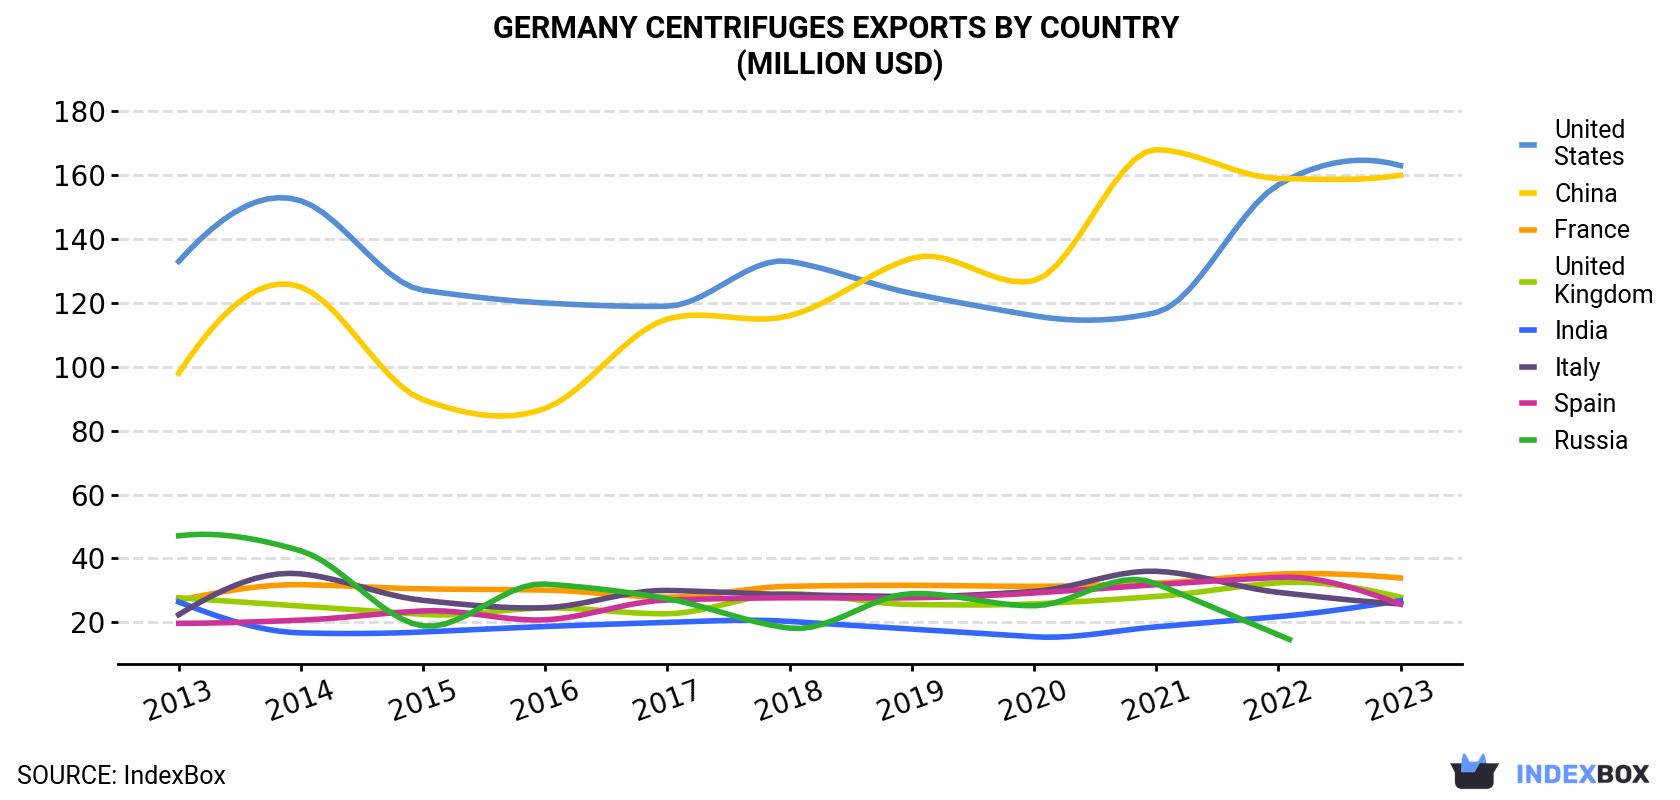 Germany Centrifuges Exports By Country (Million USD)